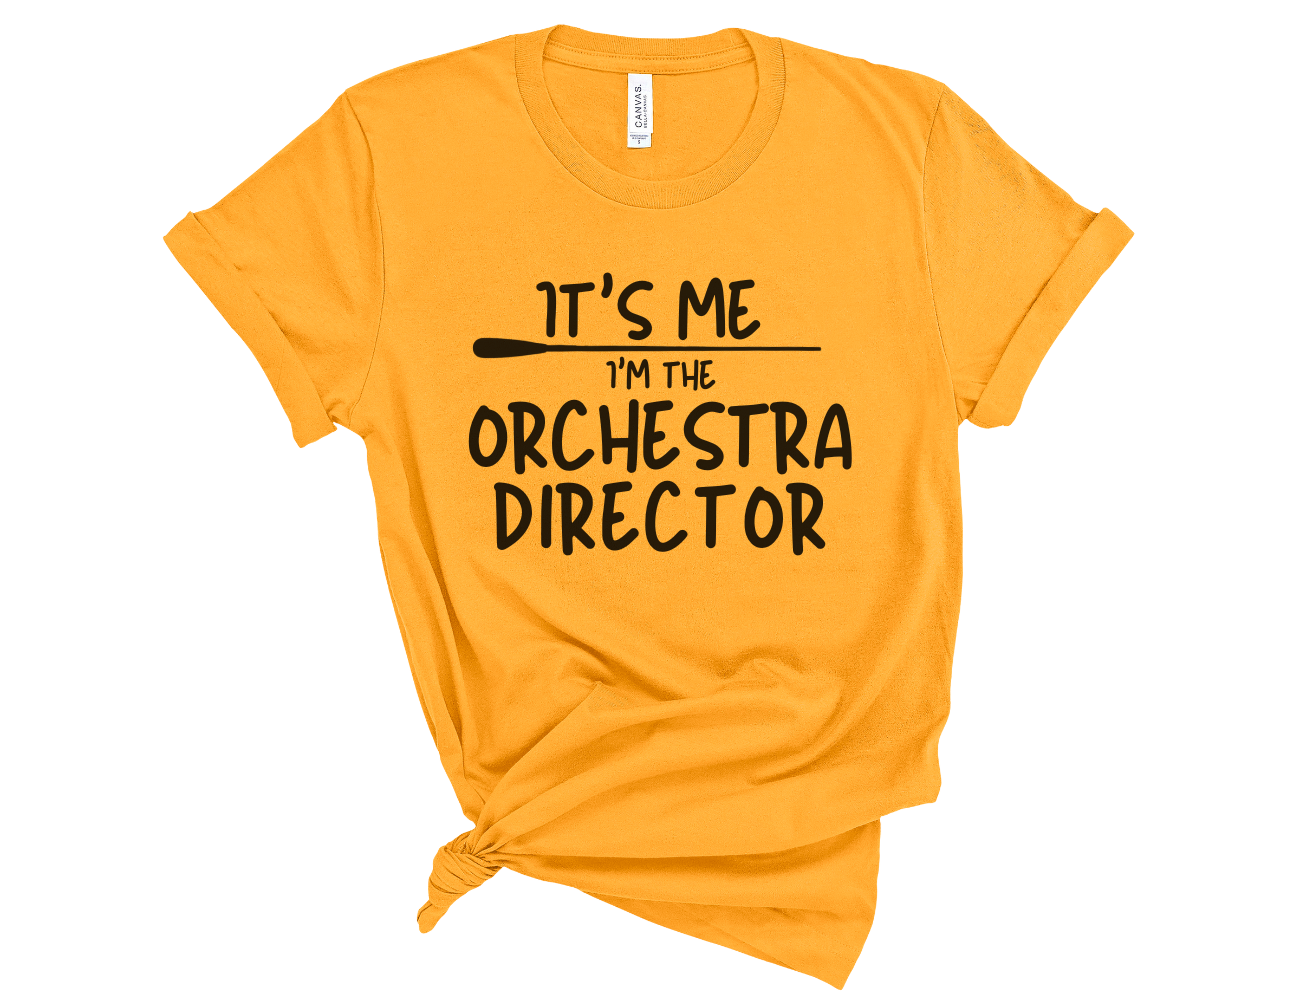 It's Me. I'm the ORCHESTRA DIRECTOR Unisex T-Shirt